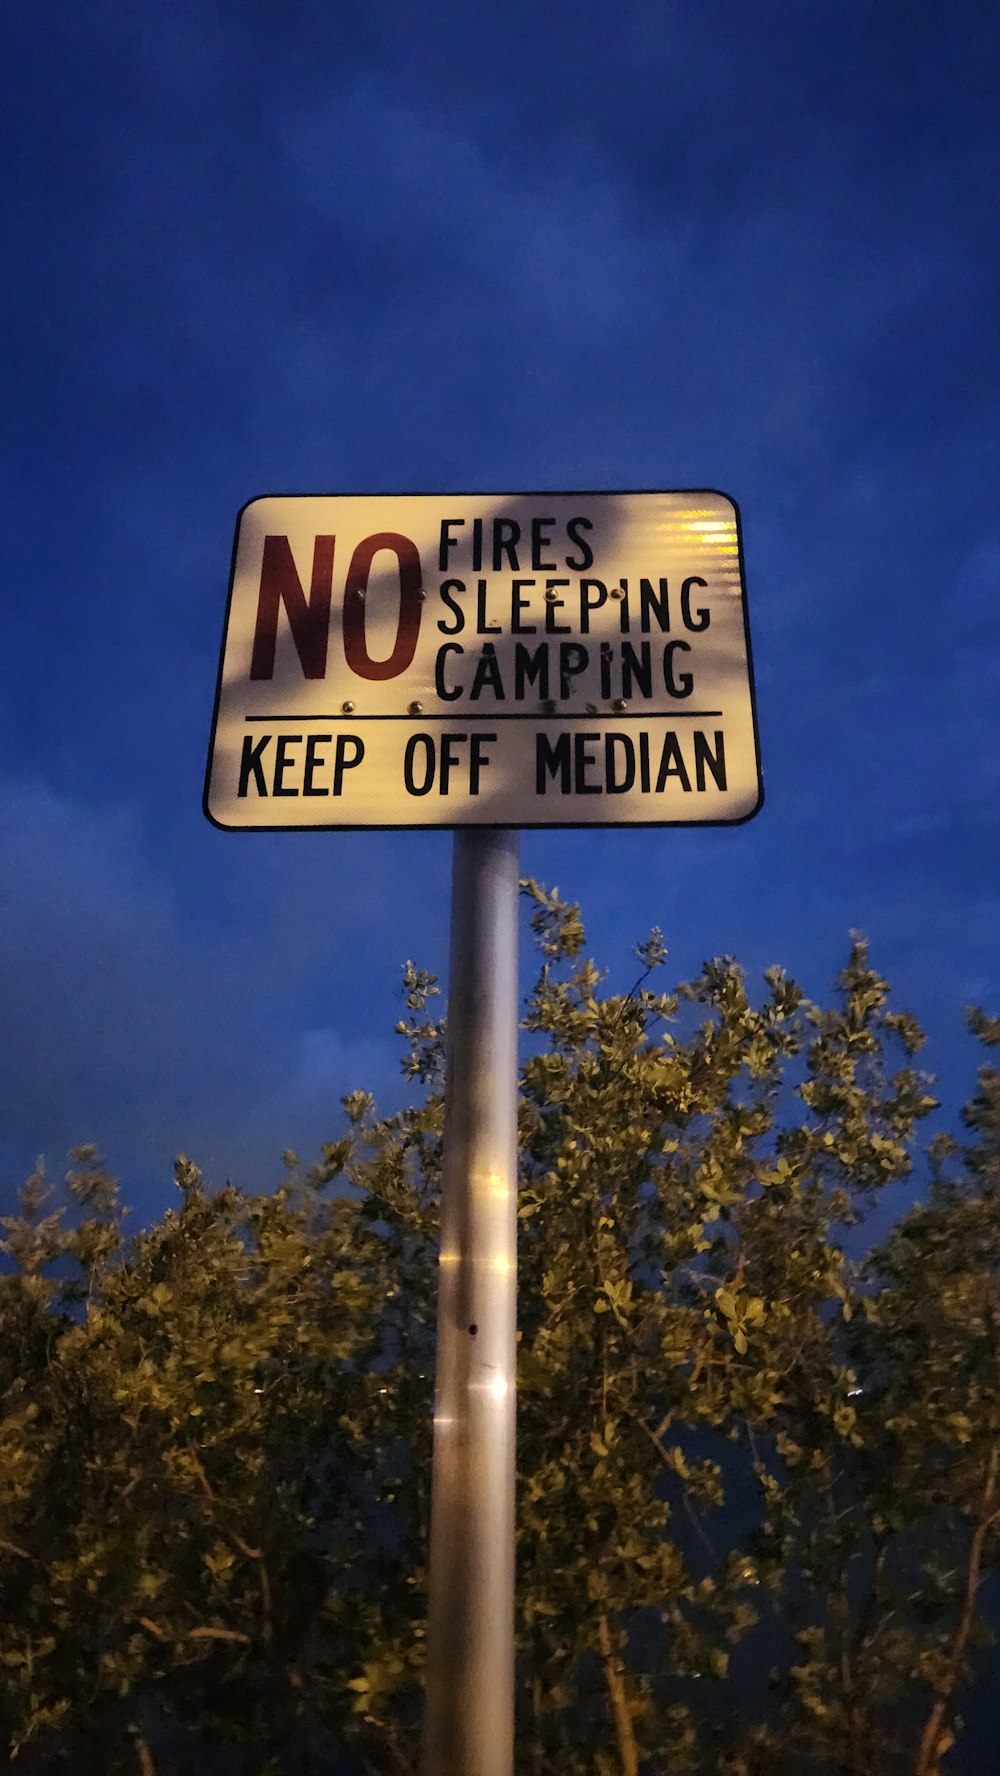 a sign on a pole that says no fire sleeping camping keep off median